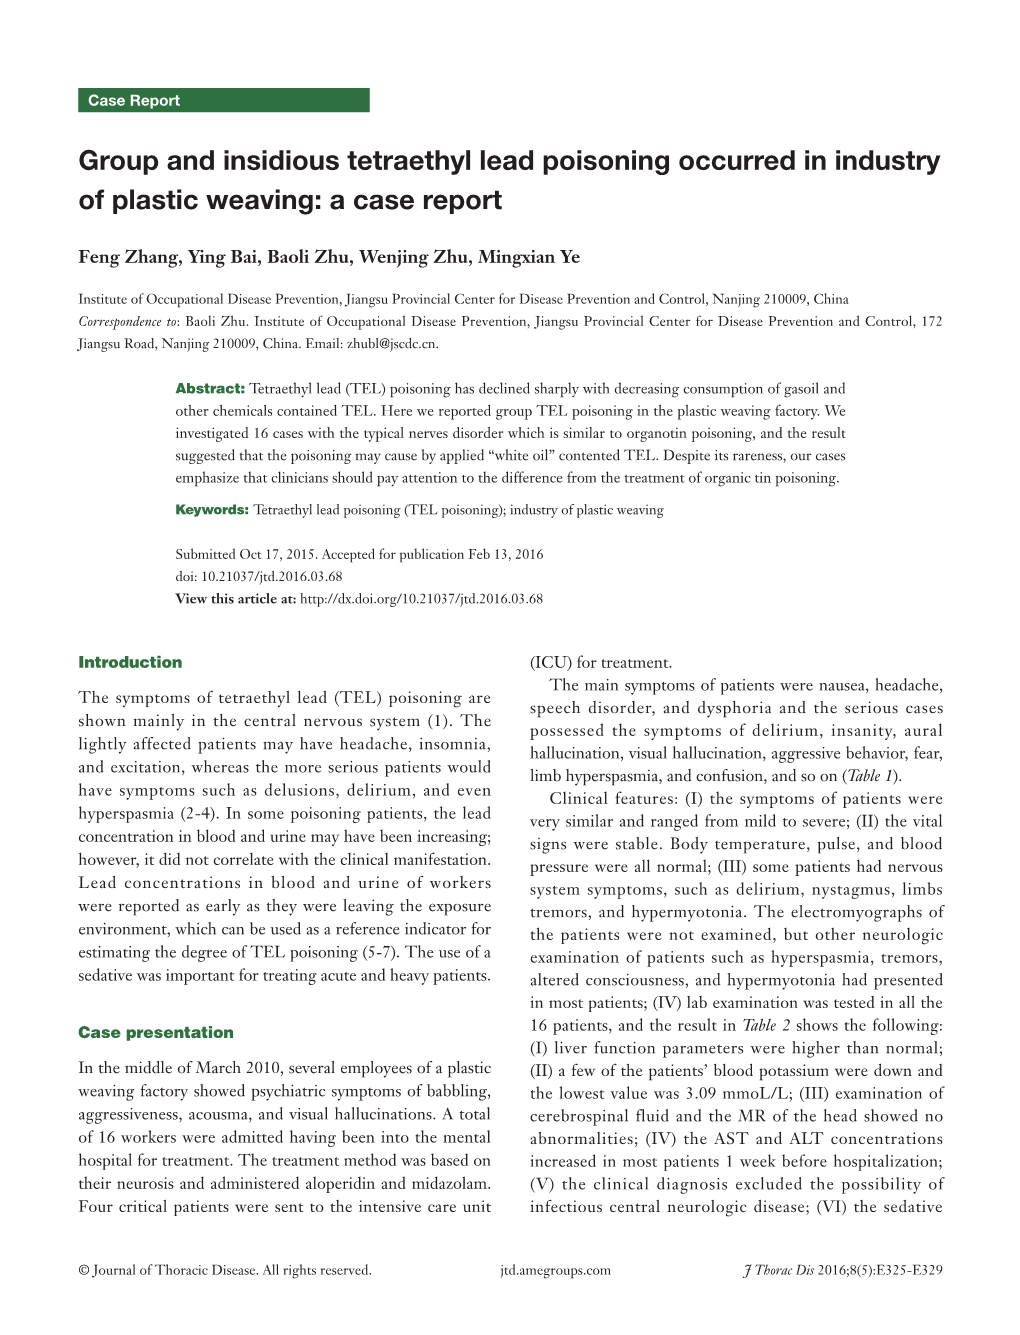 Group and Insidious Tetraethyl Lead Poisoning Occurred in Industry of Plastic Weaving: a Case Report